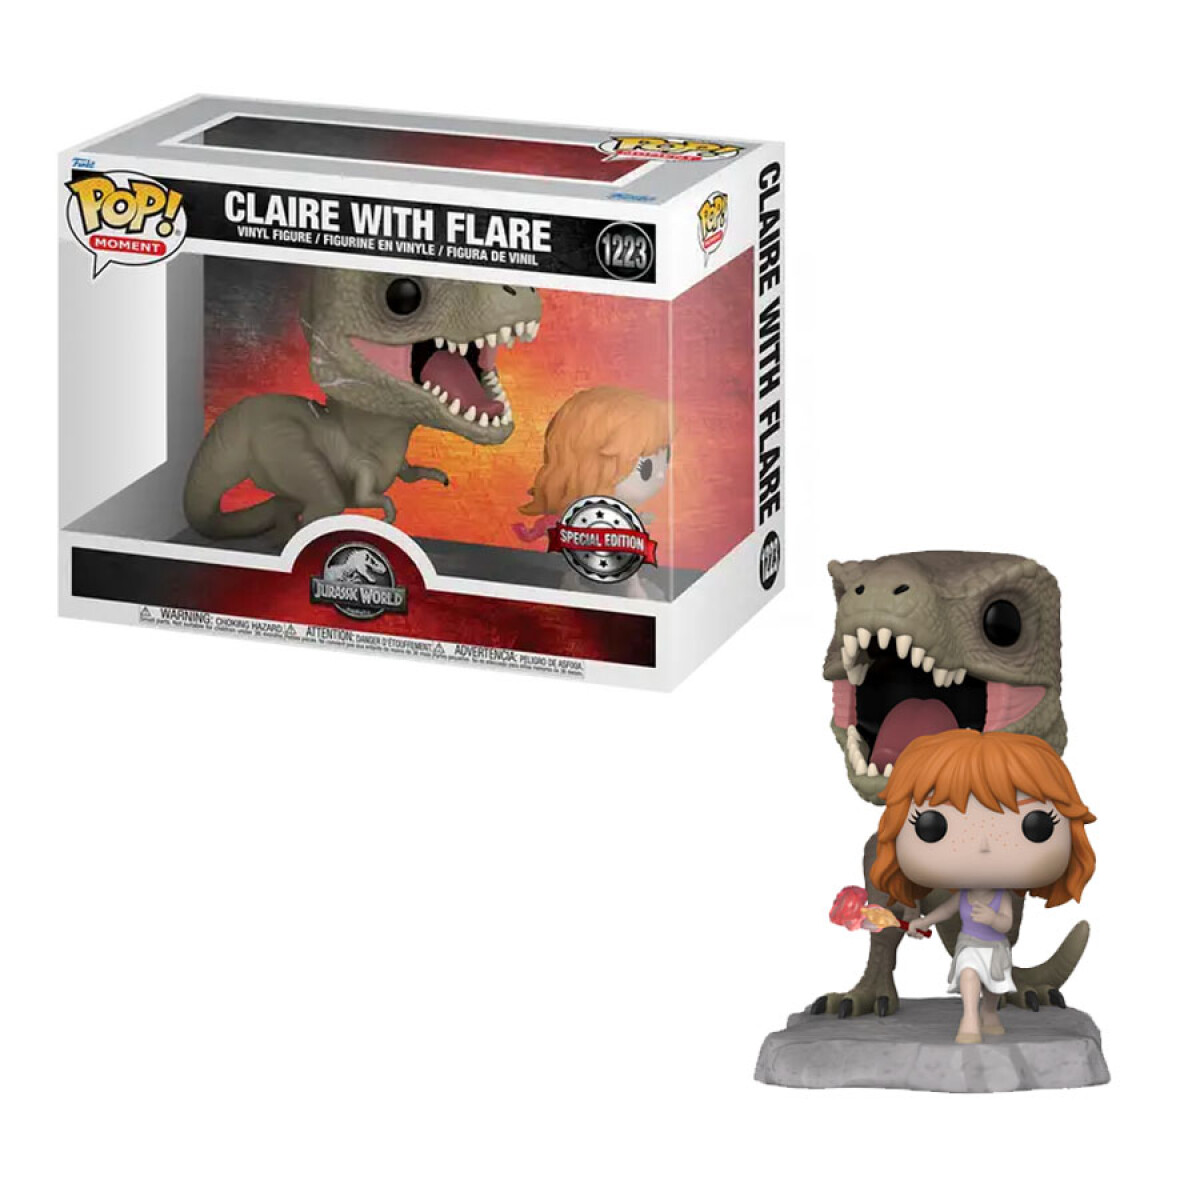 Claire With Flare • Jurassic World [Exclusivo] - 1223 